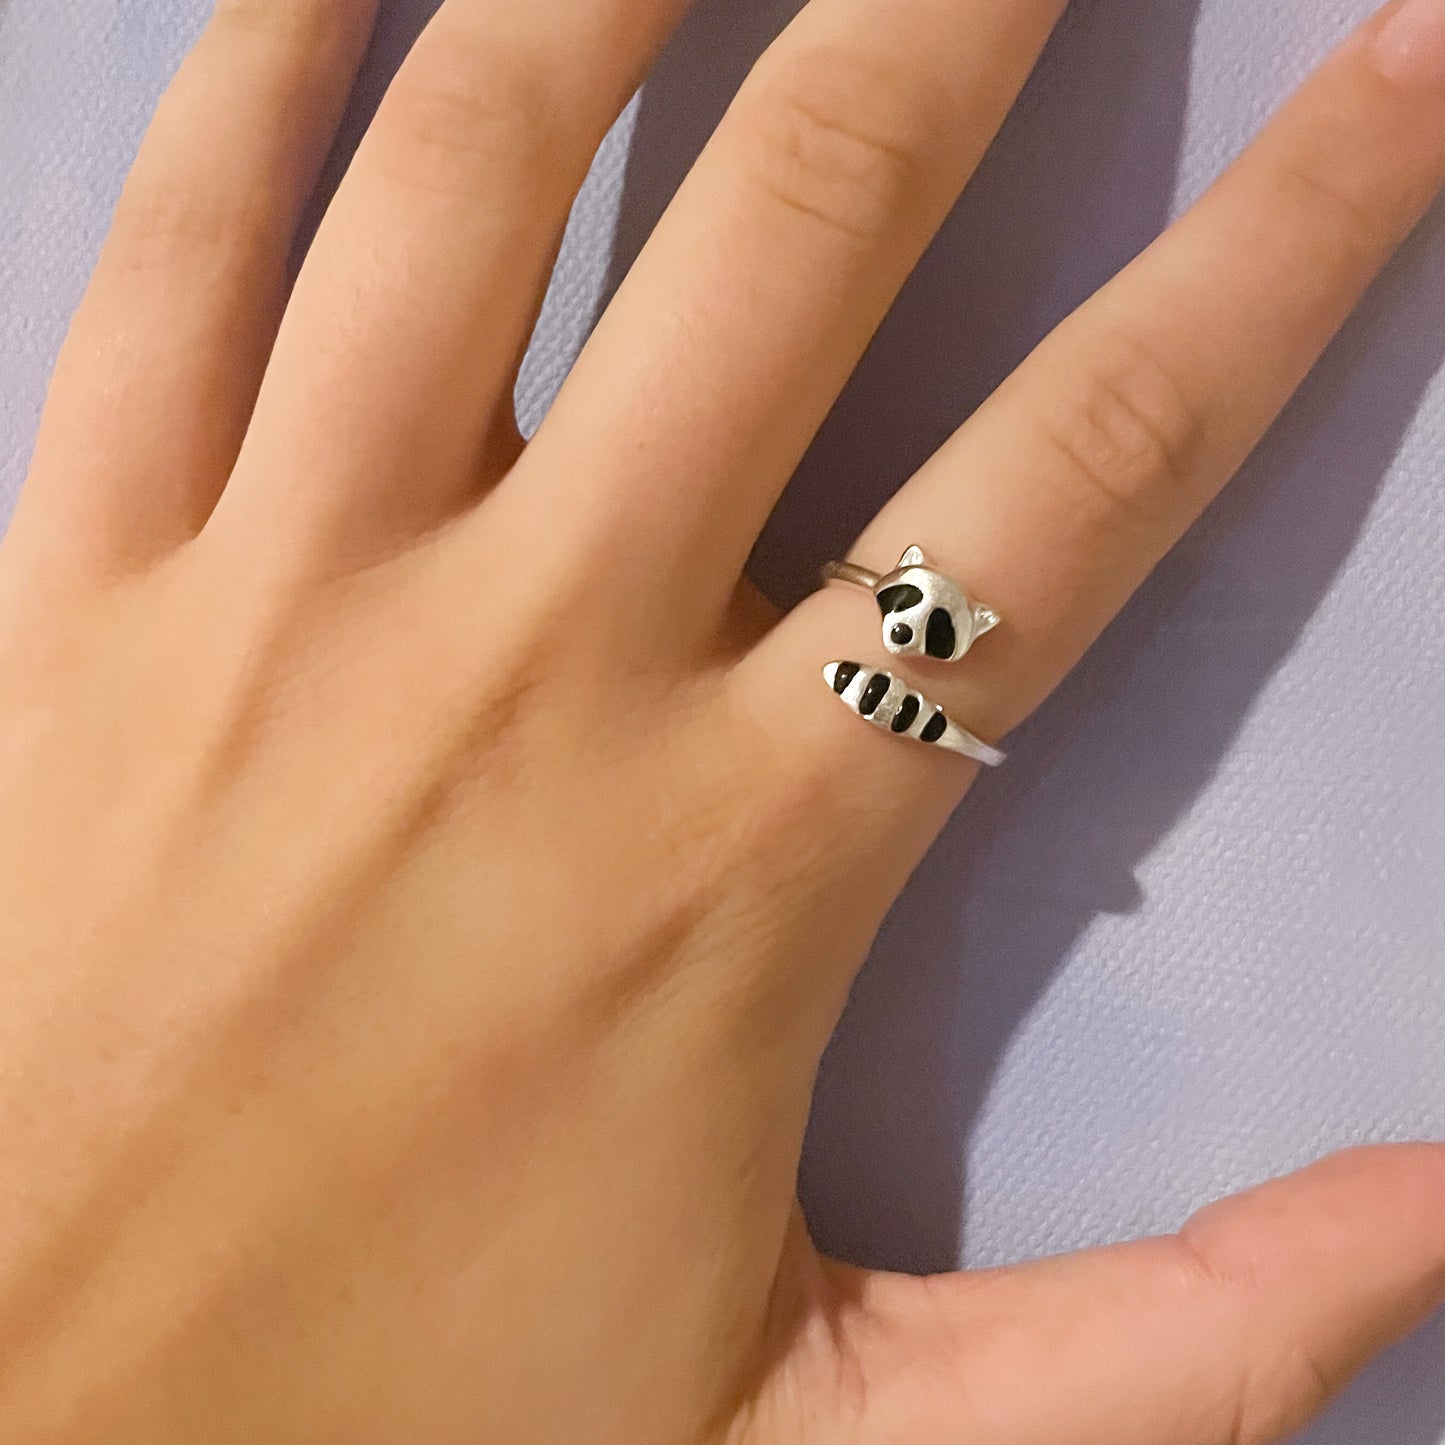 A hand with the raccoon ring on the pointer finger